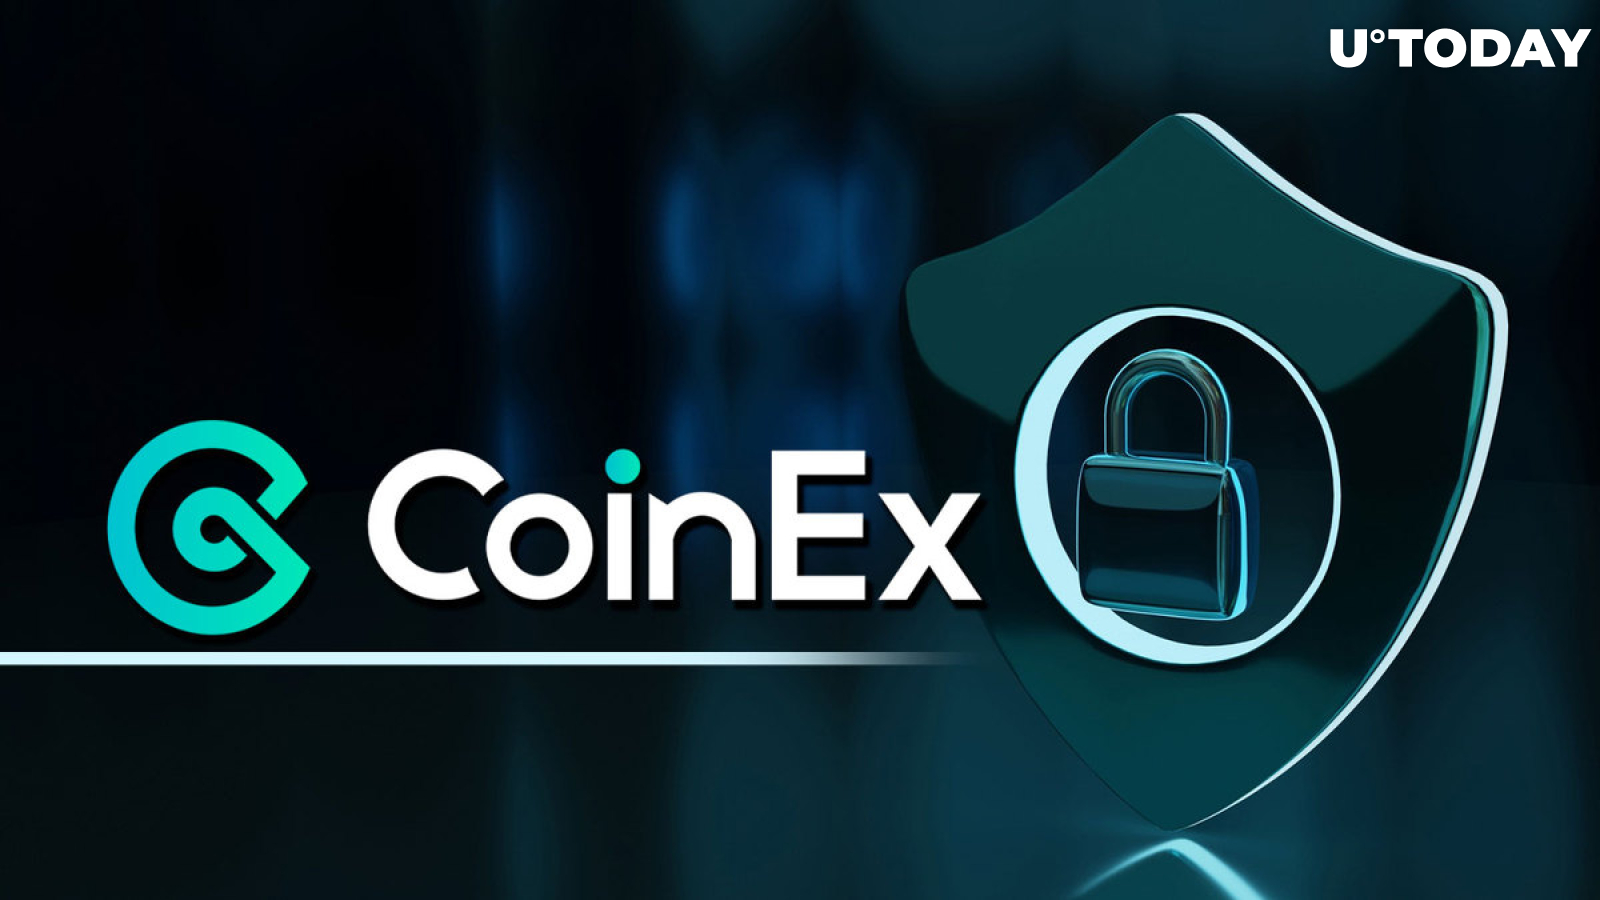 CoinEx Deploys Crucial Security Upgrades for Crypto Industry, Letter from CEO Says